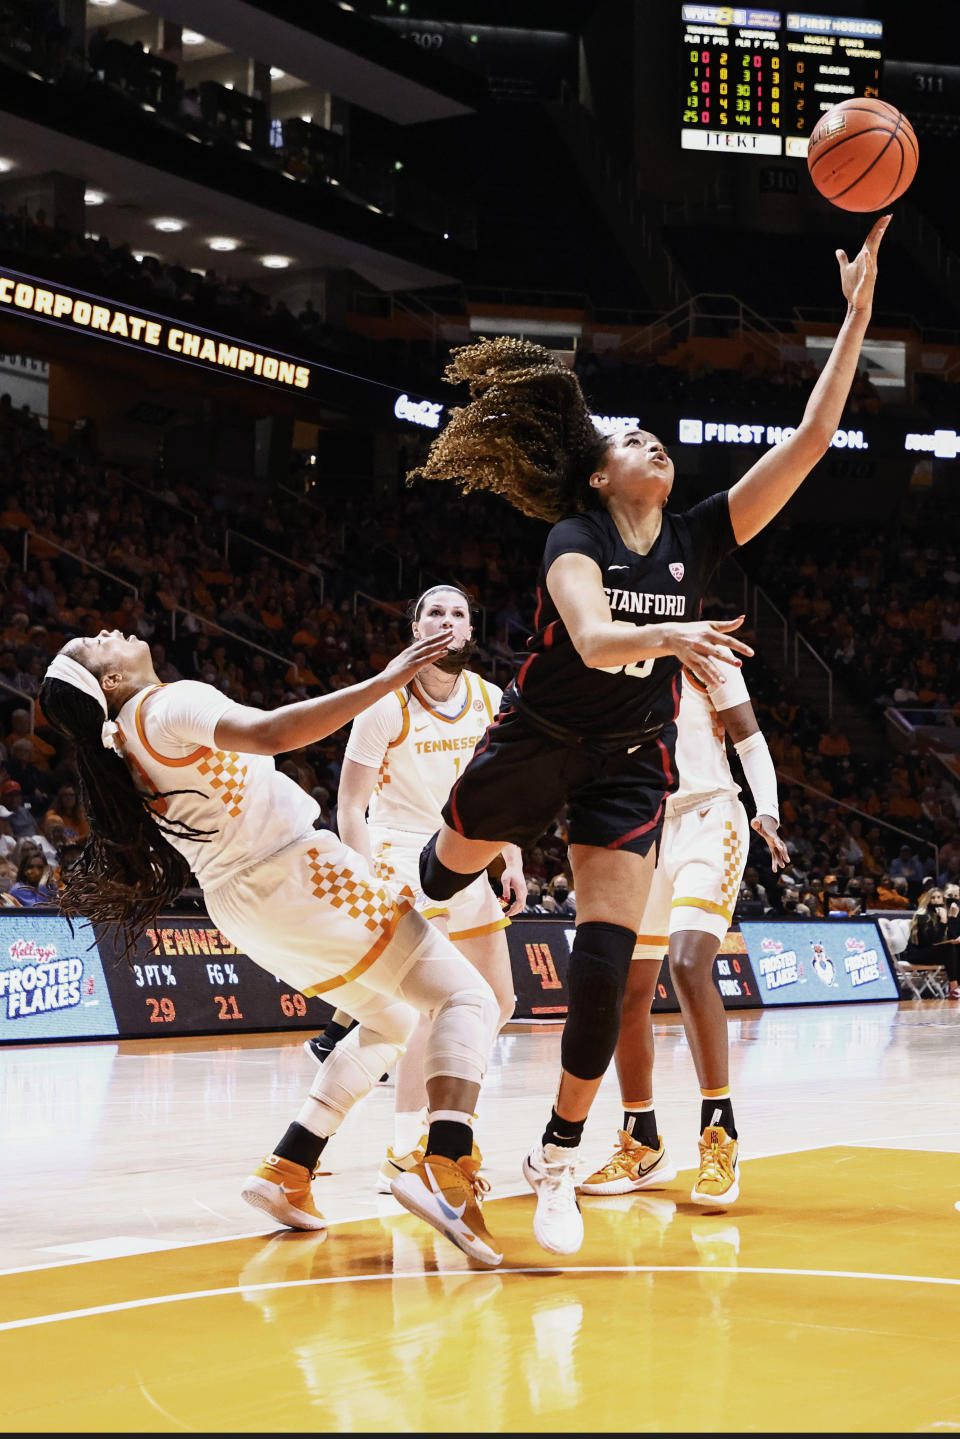 Stanford guard Haley Jones (30) shoots past Tennessee forward Keyen Green (13) during the first half of an NCAA college basketball game Saturday, Dec. 18, 2021, in Knoxville, Tenn. (AP Photo/Wade Payne)